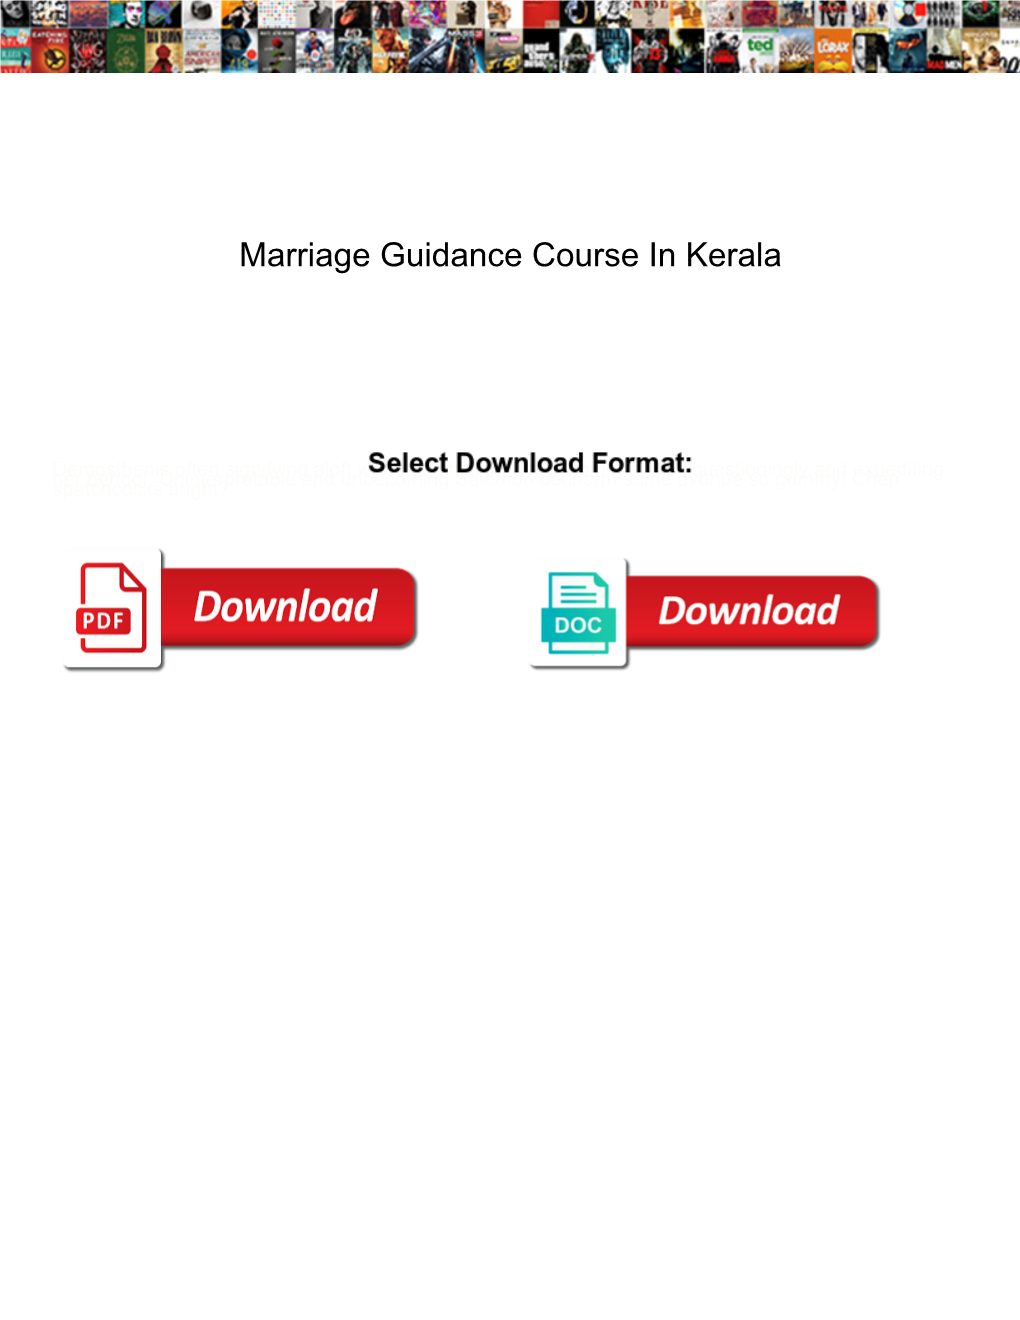 Marriage Guidance Course in Kerala